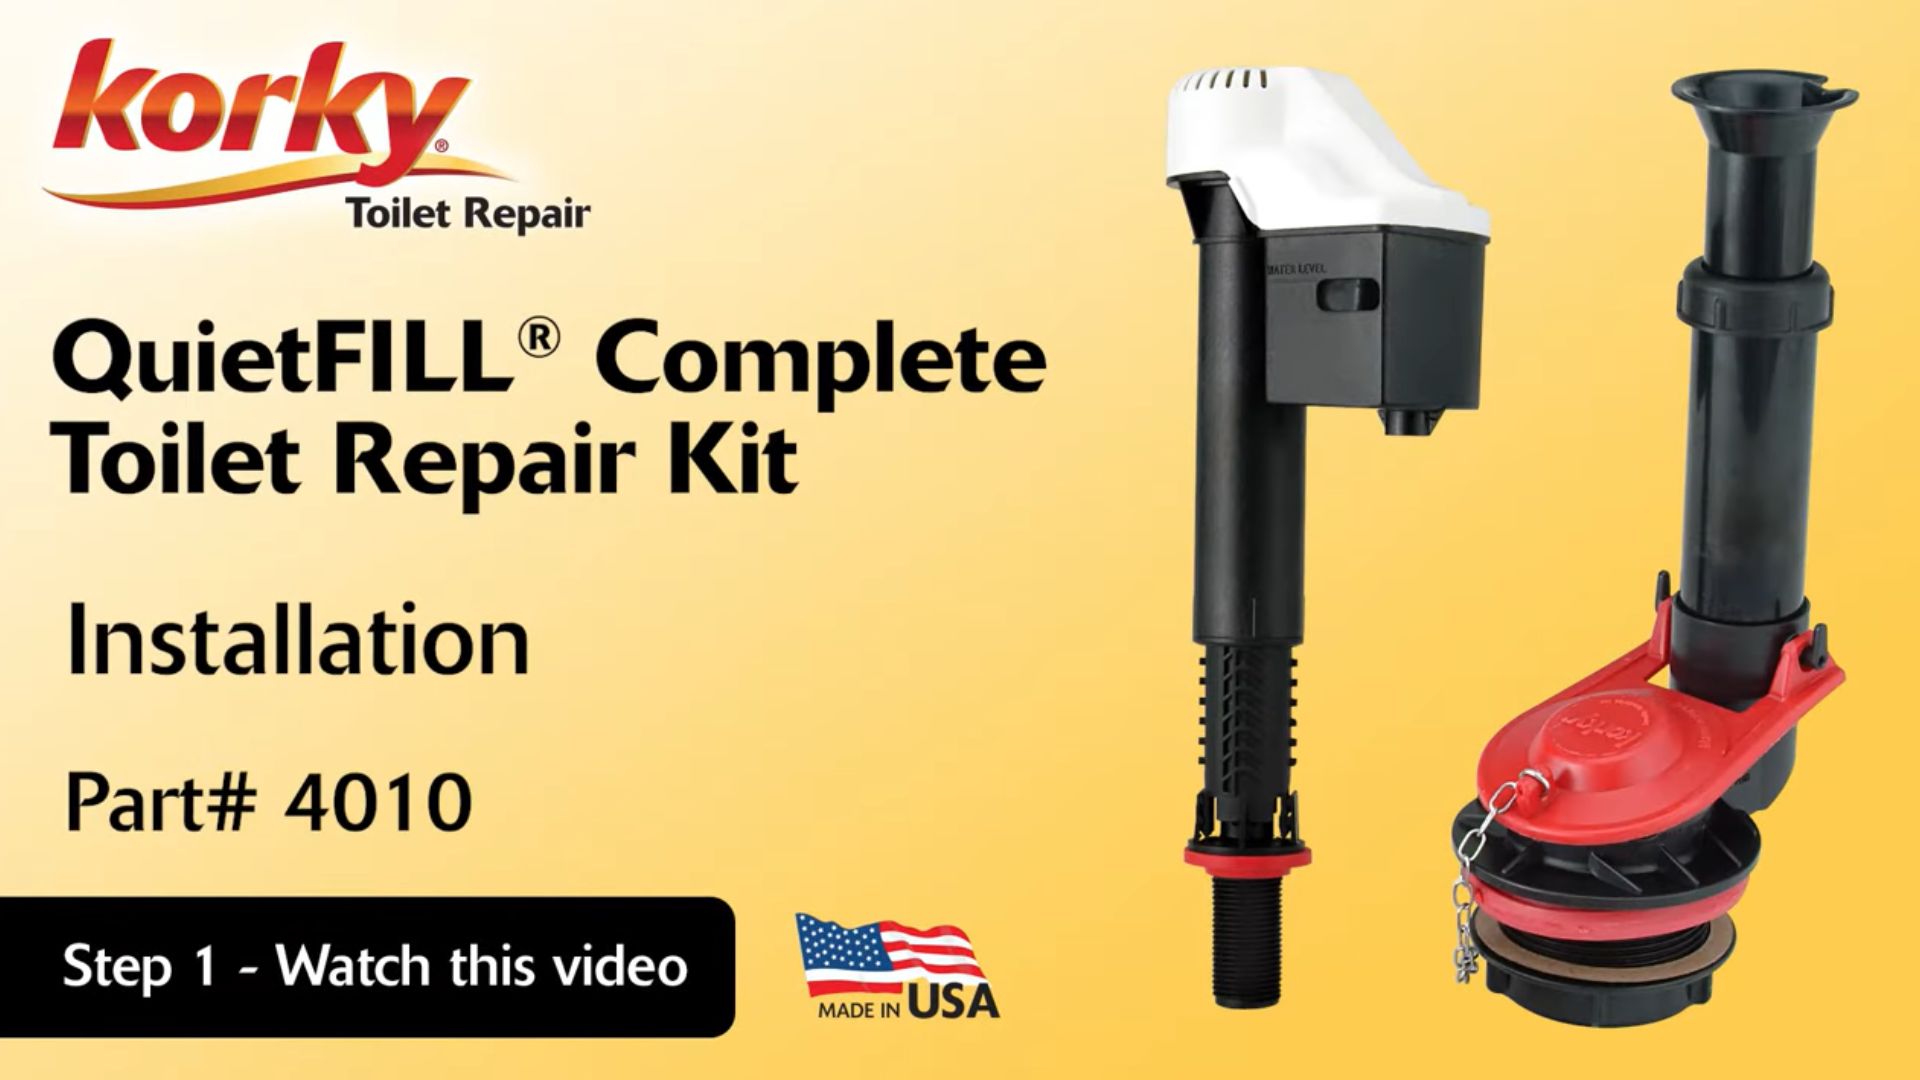 How to Install QuietFILL Complete Toilet Repair Kit - 4010 | Korky Toilet Repair